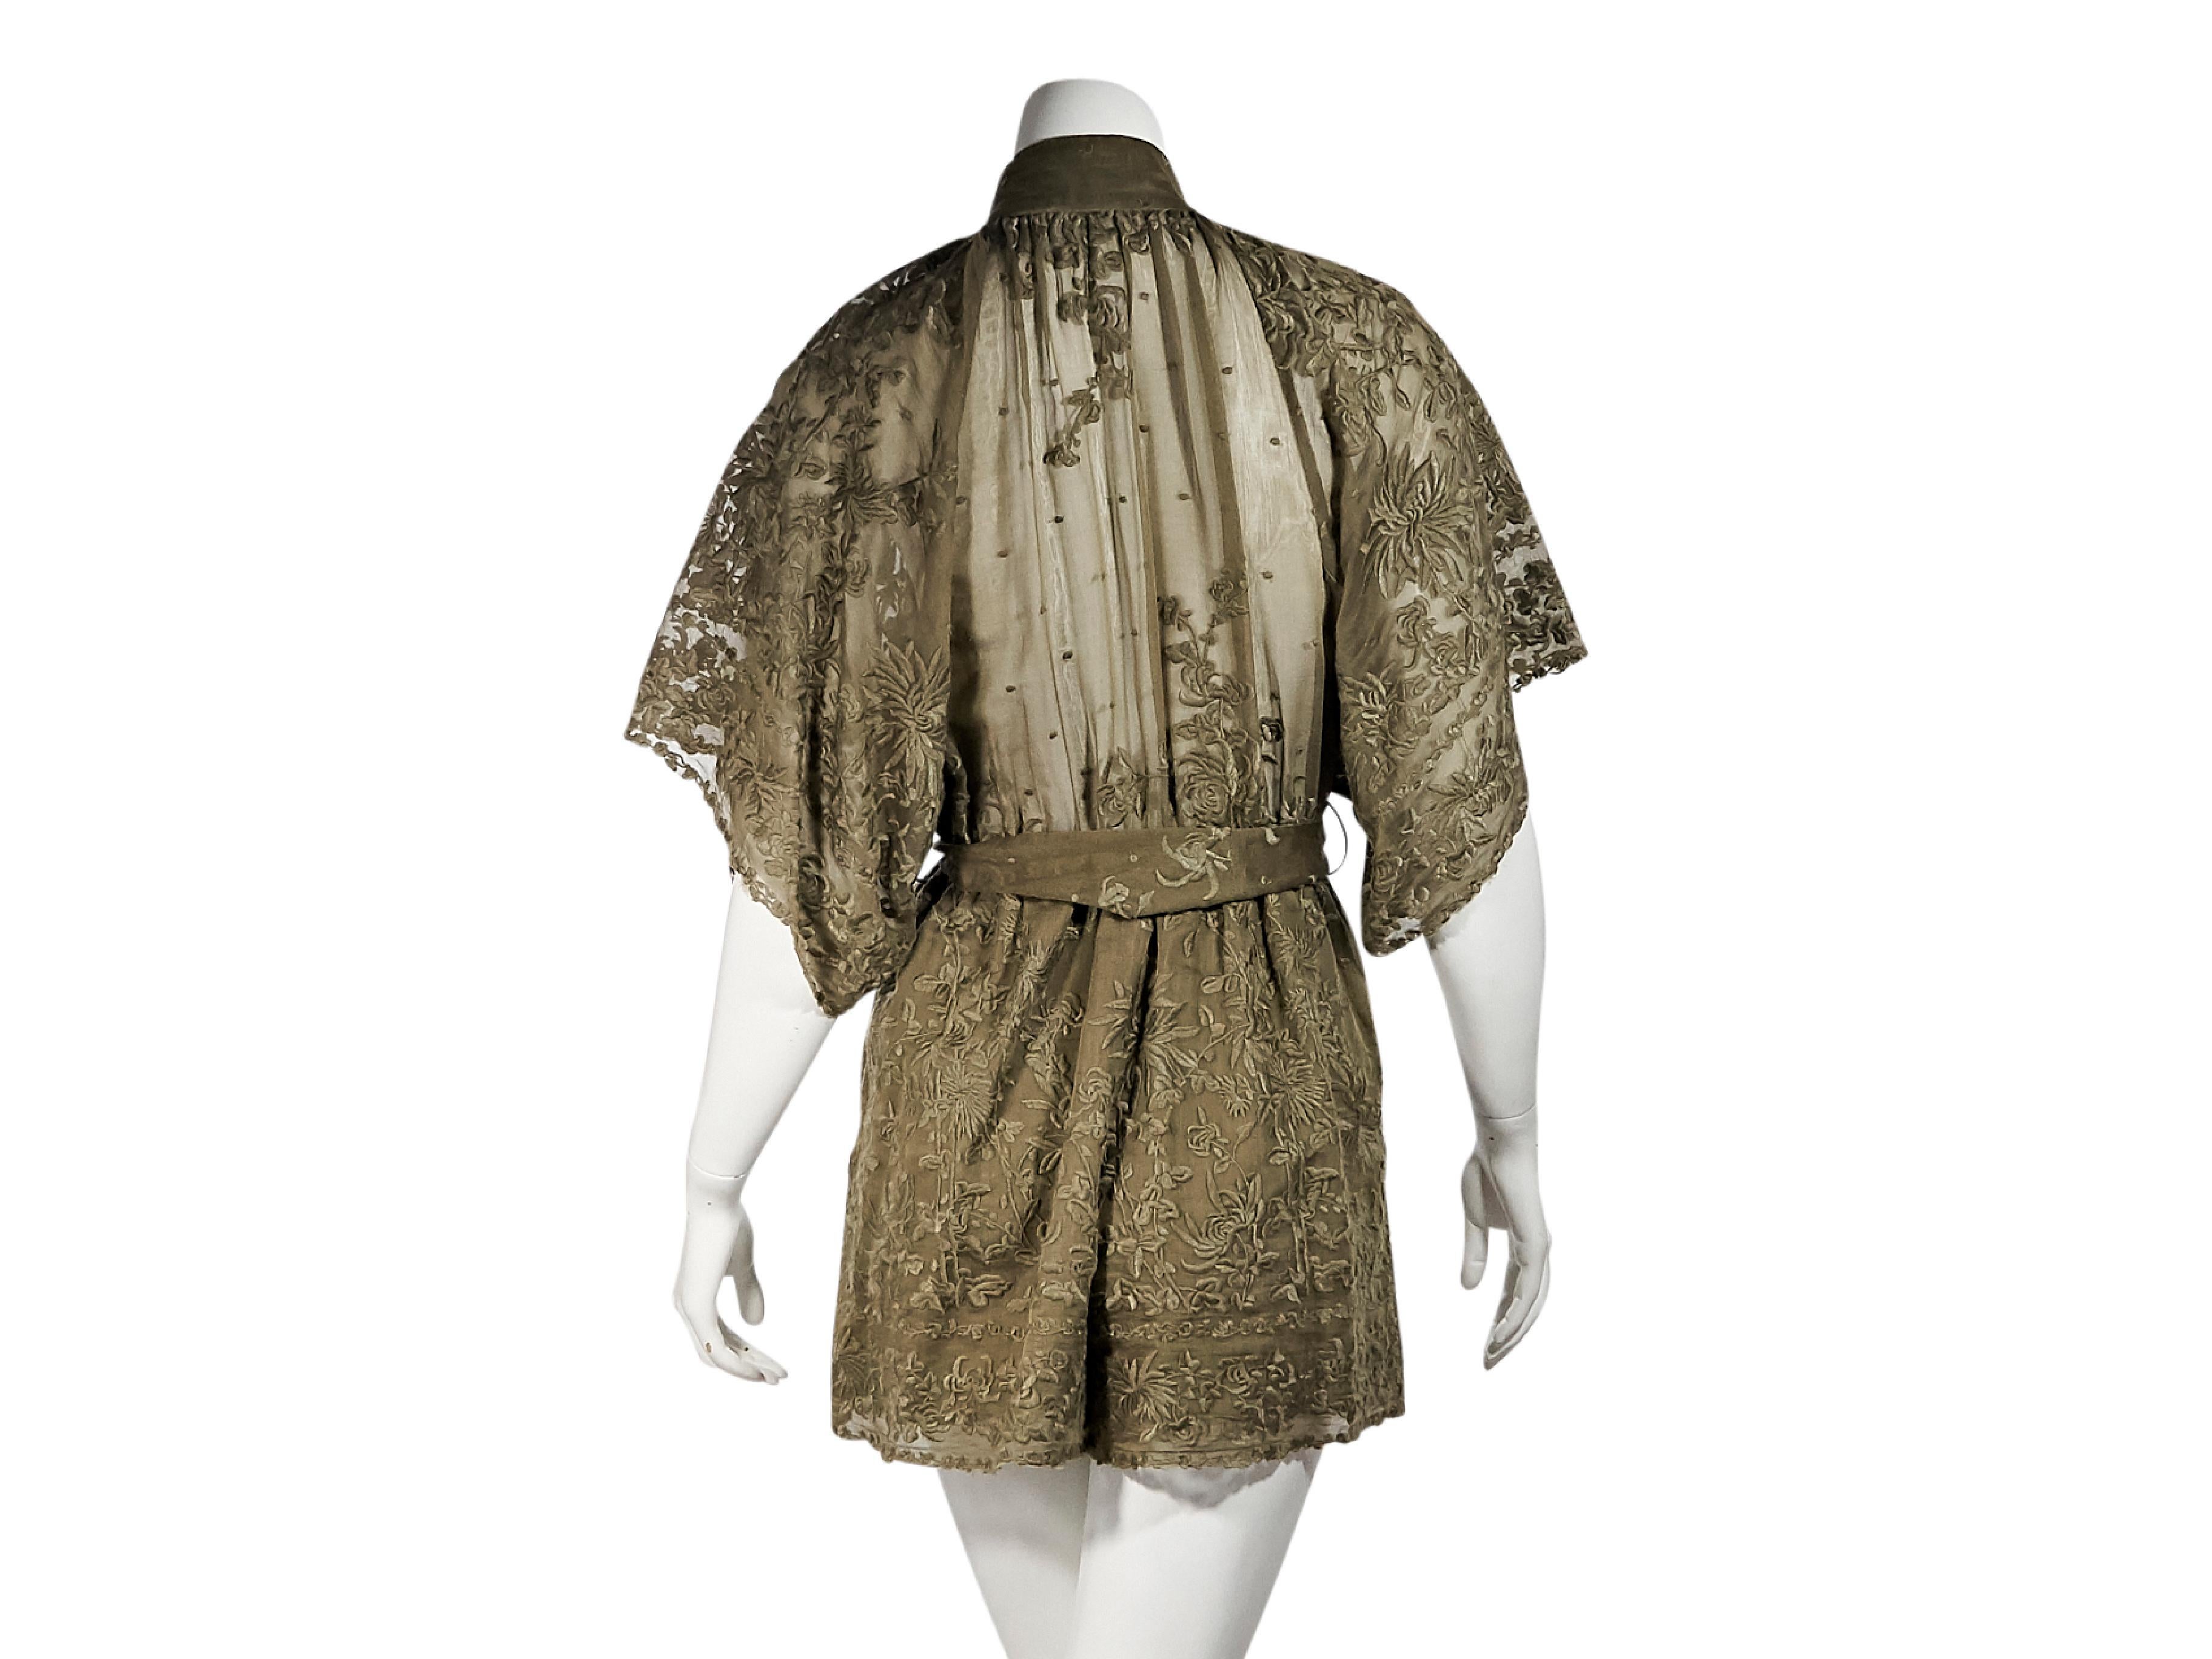 Product details:  Khaki floral embroidered cotton and silk blend romper by Zimmermann.  Stand collar.  Elbow-length dolman sleeves.  Button-front bodice.  Self-tie belted waist.  23